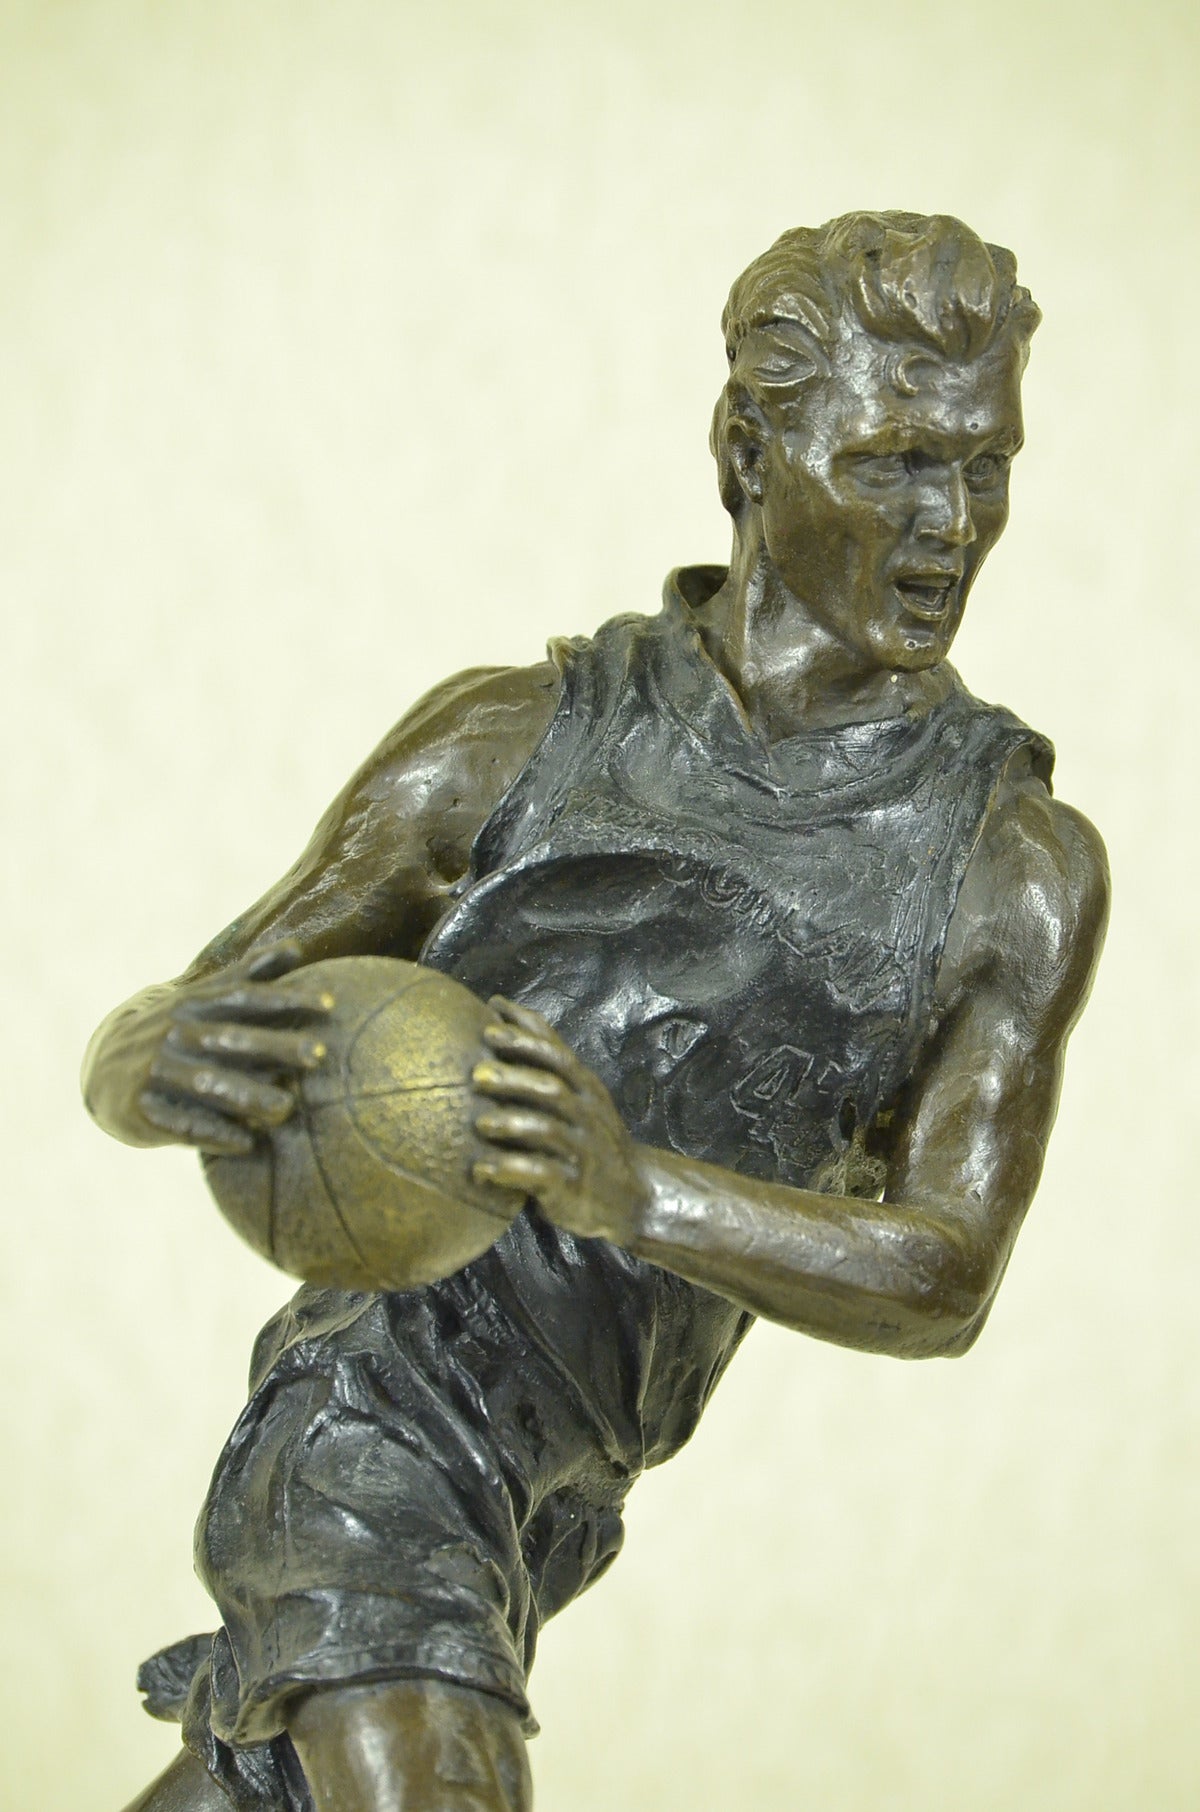 VINTAGE BRONZE STATUE BASKETBALL PLAYER SPORTS ICON BLACK MARBLE POST UP